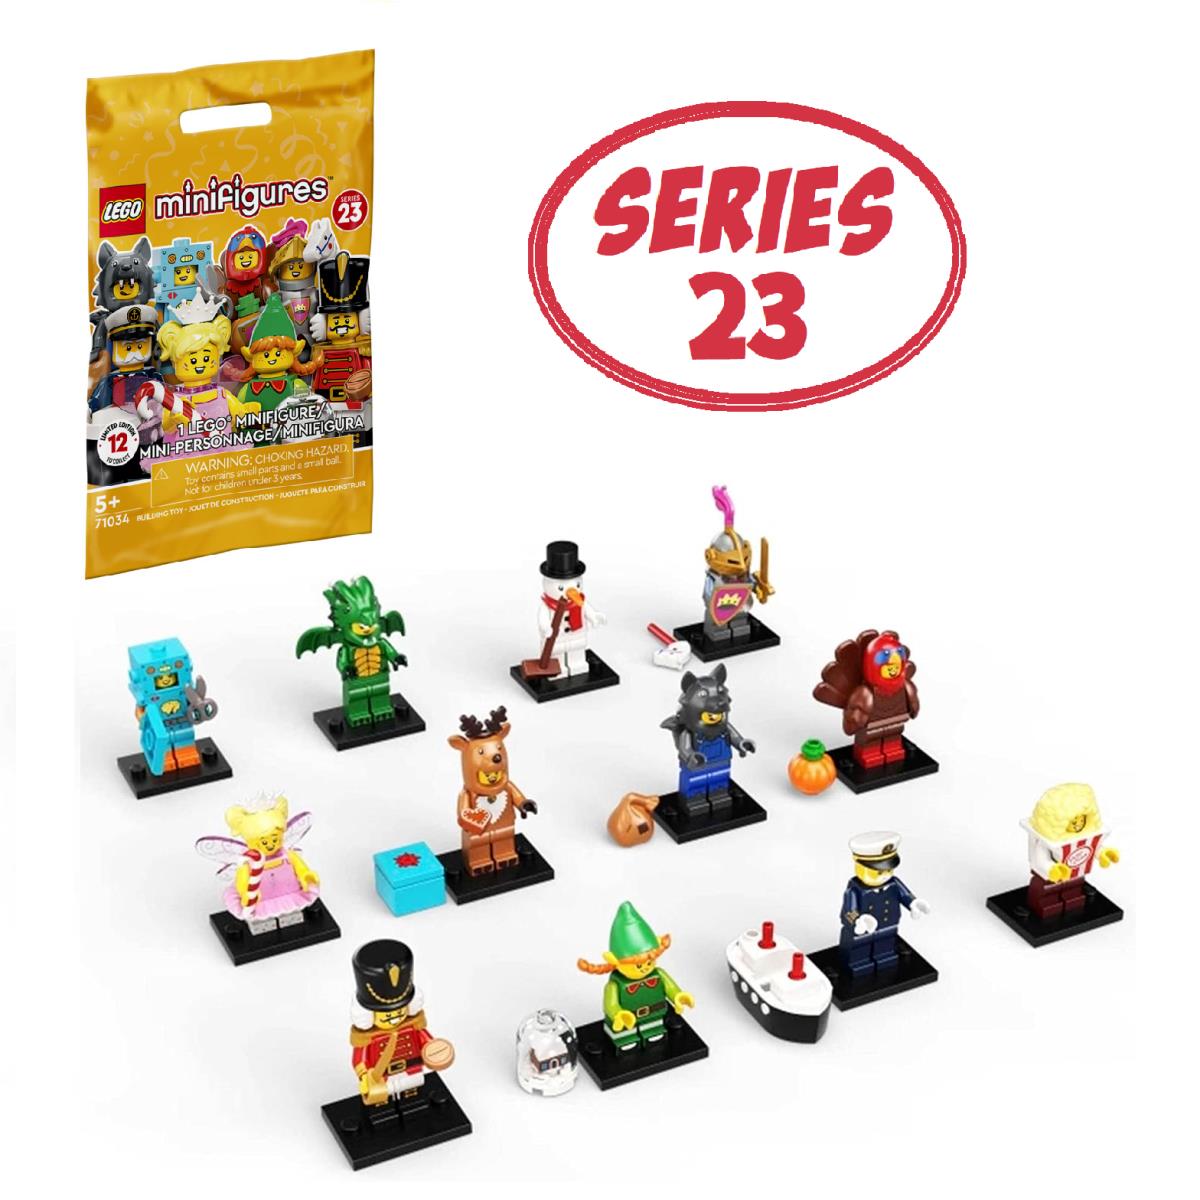 Lego Series 23 Collectible Minifigures 71034 - Complete Set of 12